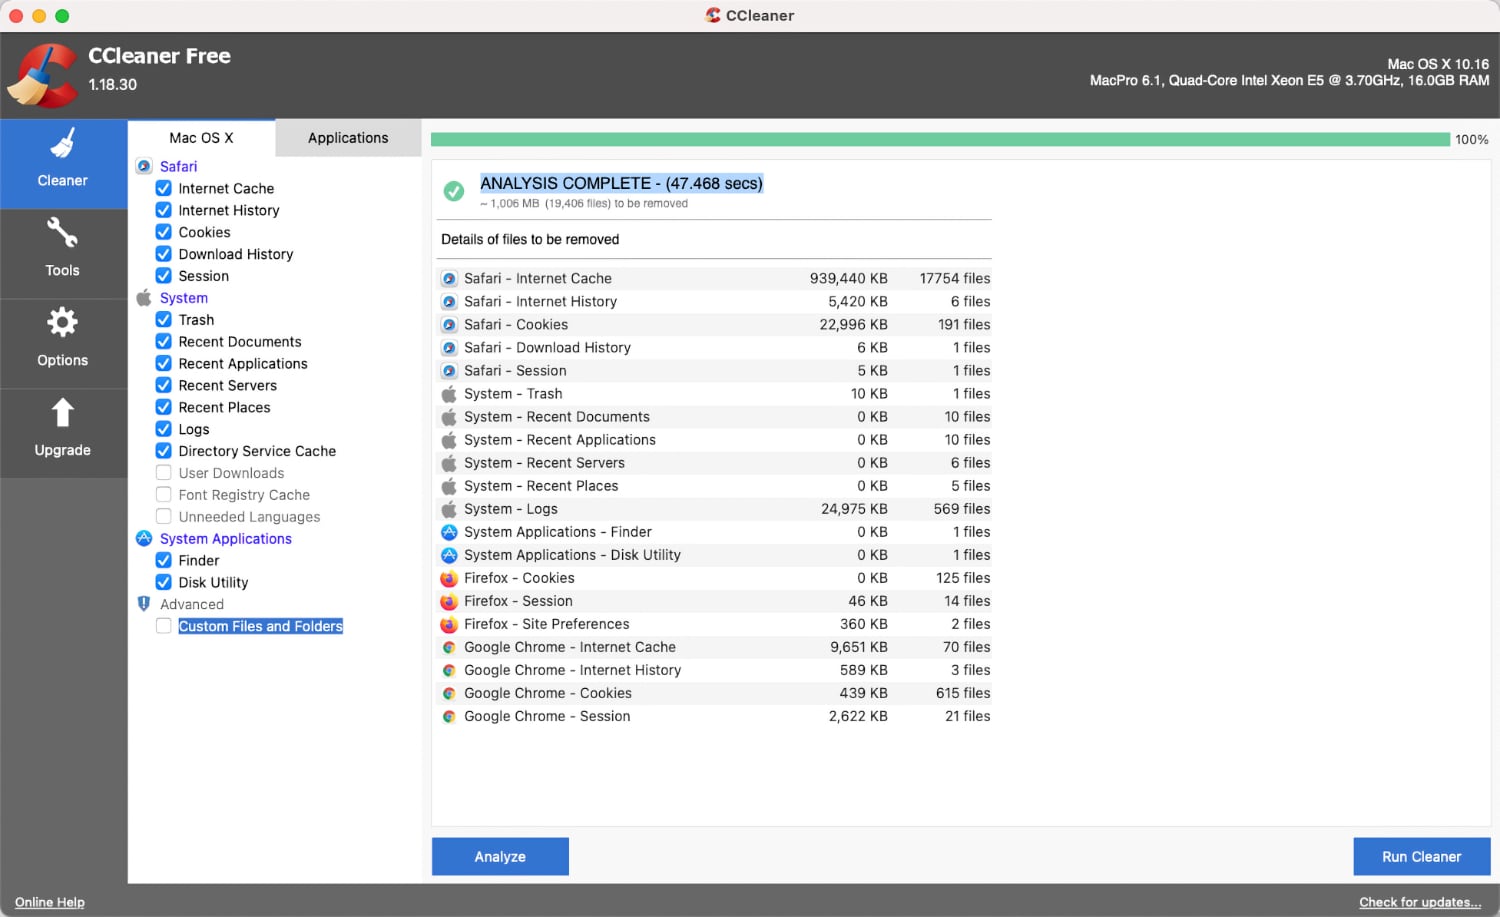 ccleaner recommended for mac